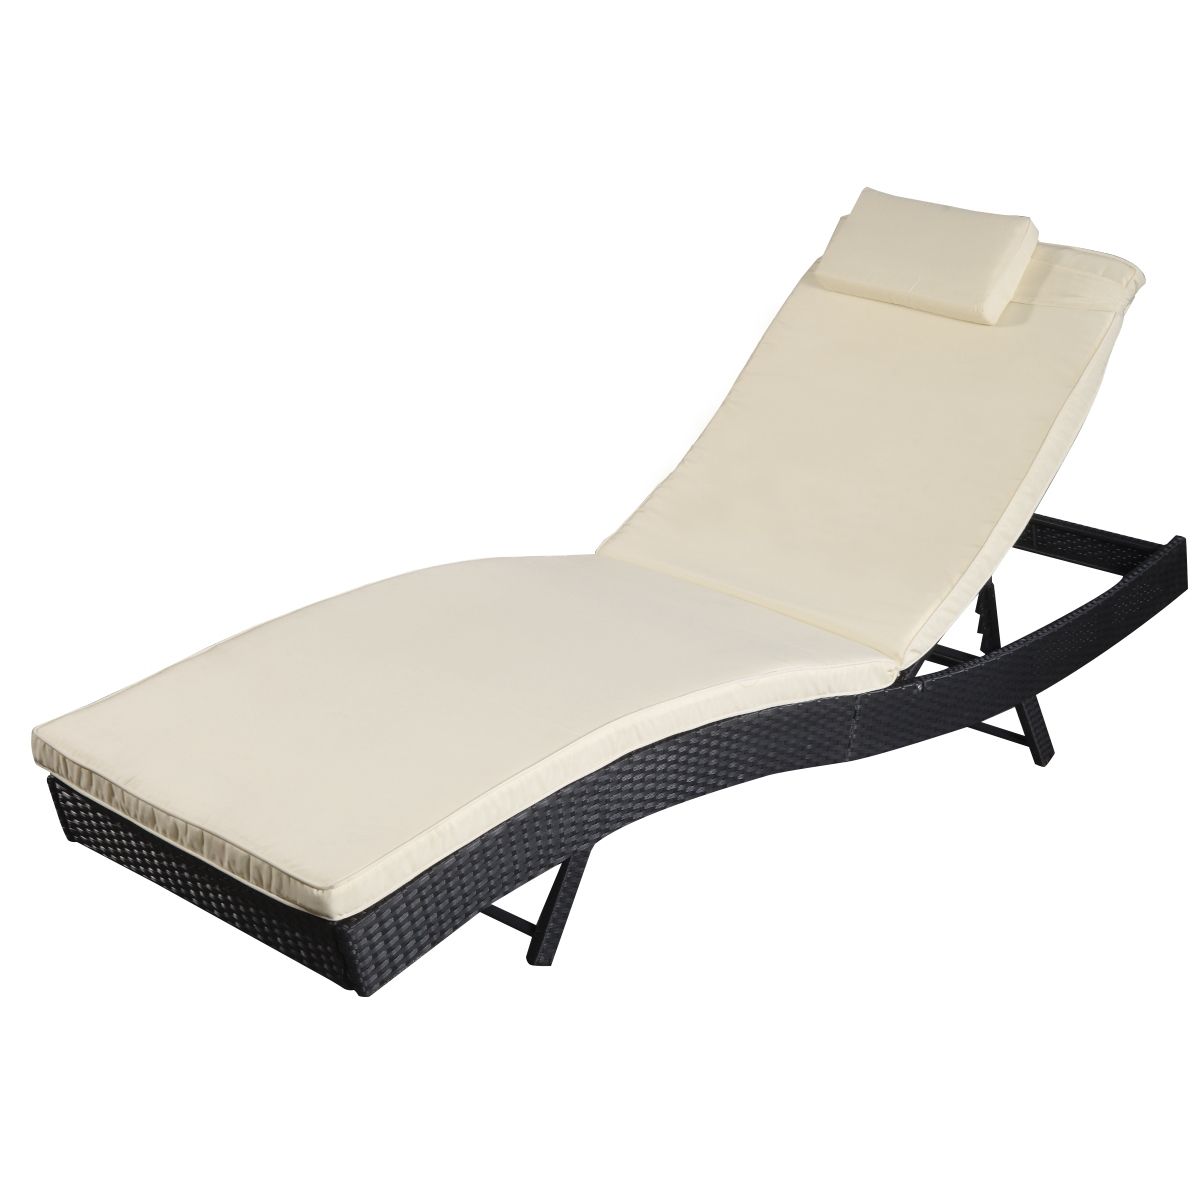 Costway Adjustable Pool Chaise Lounge Chair Outdoor Patio With Regard To Well Known Pool Chaise Lounge Chairs (View 13 of 15)